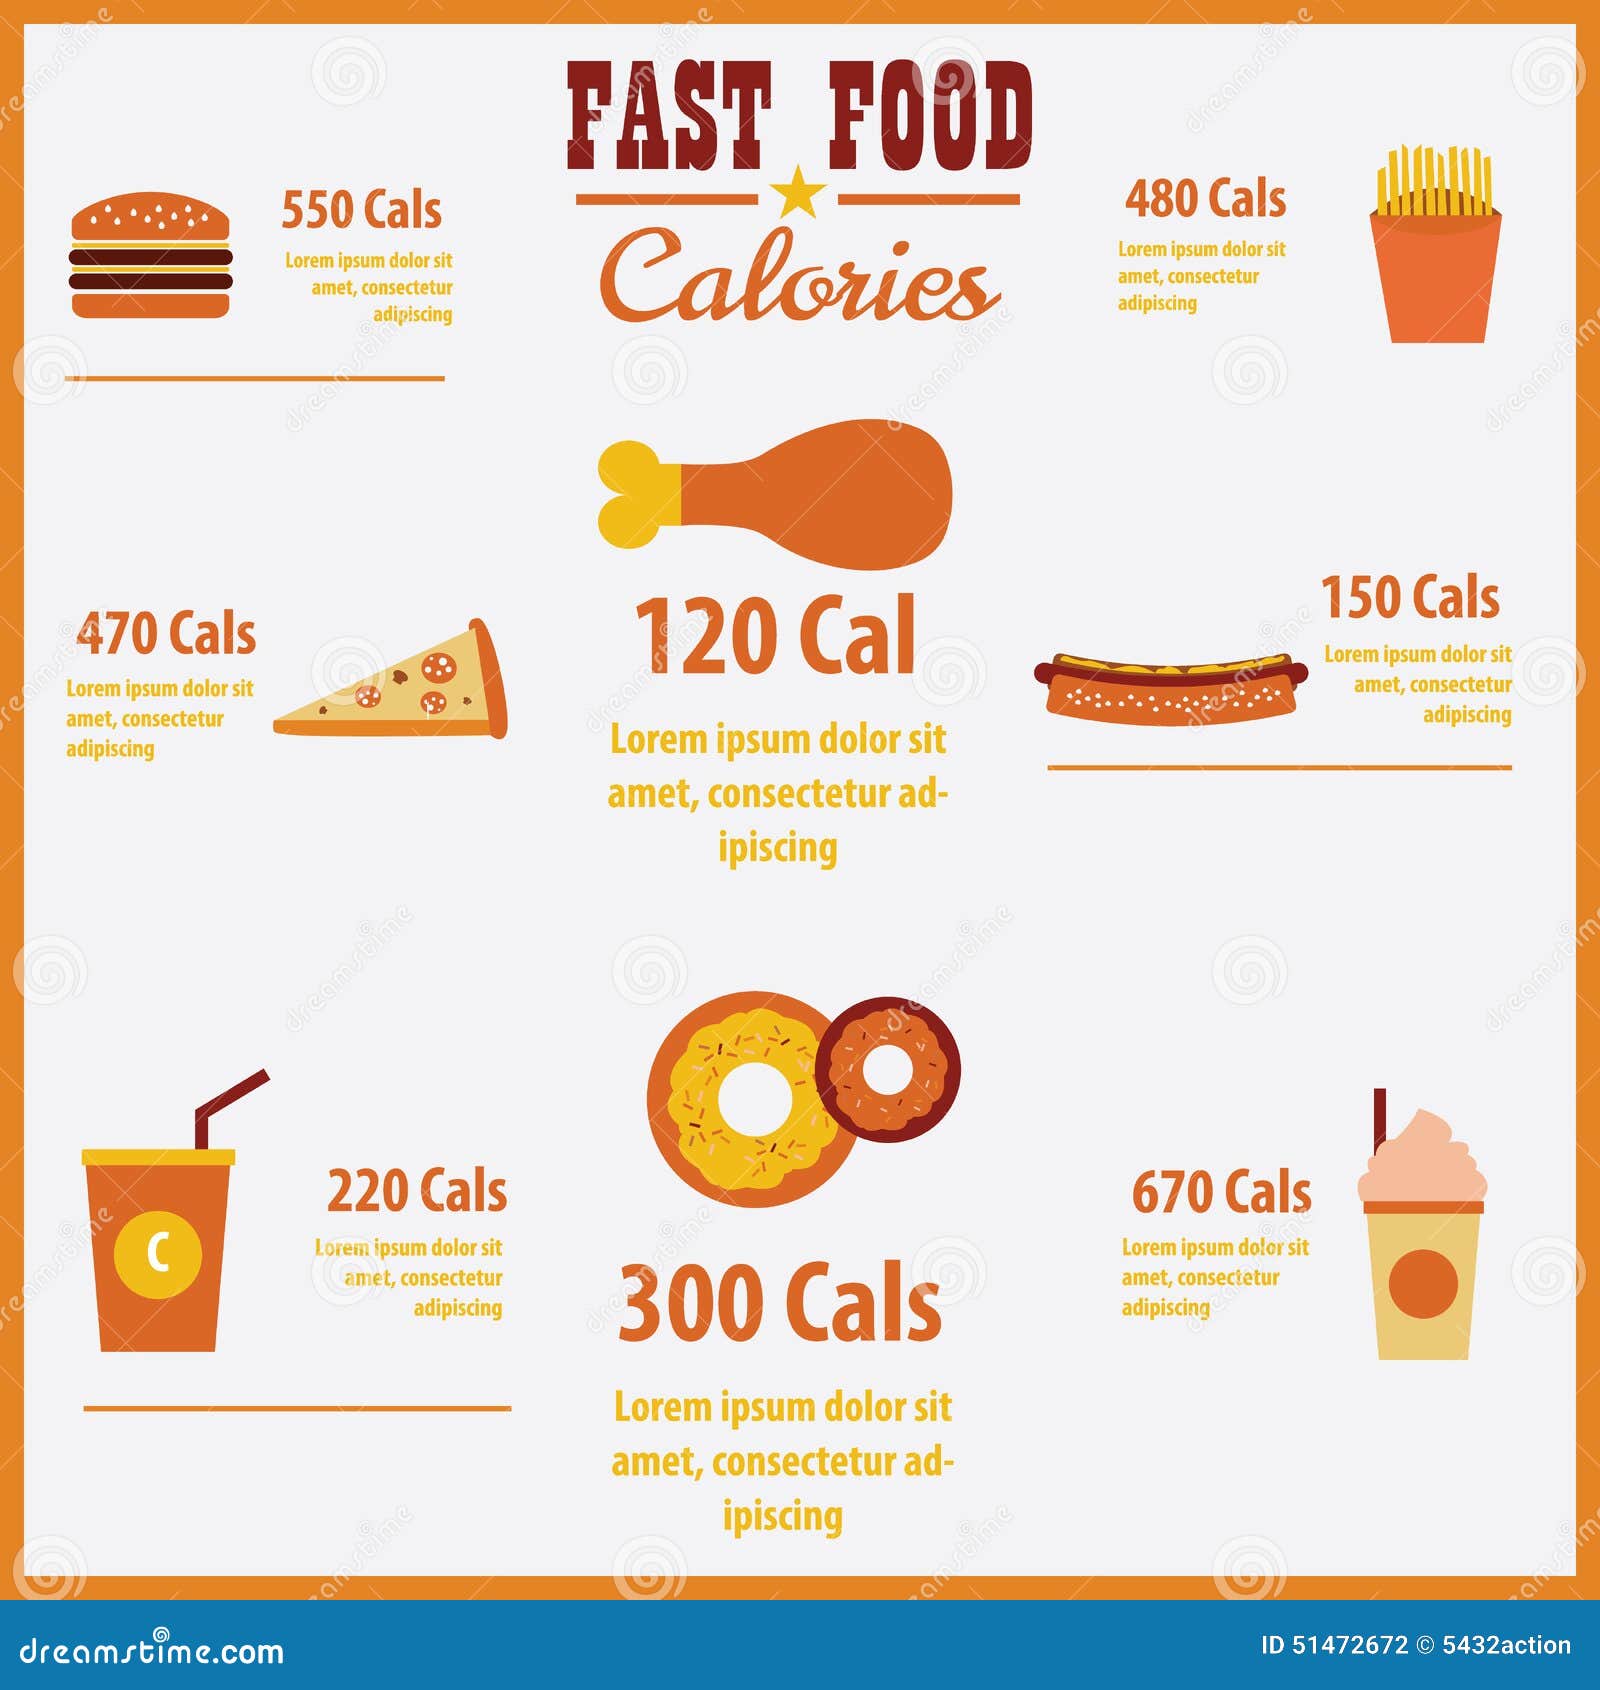 Vector Infographic Fast Food Calories. Stock Vector - Image: 51472672